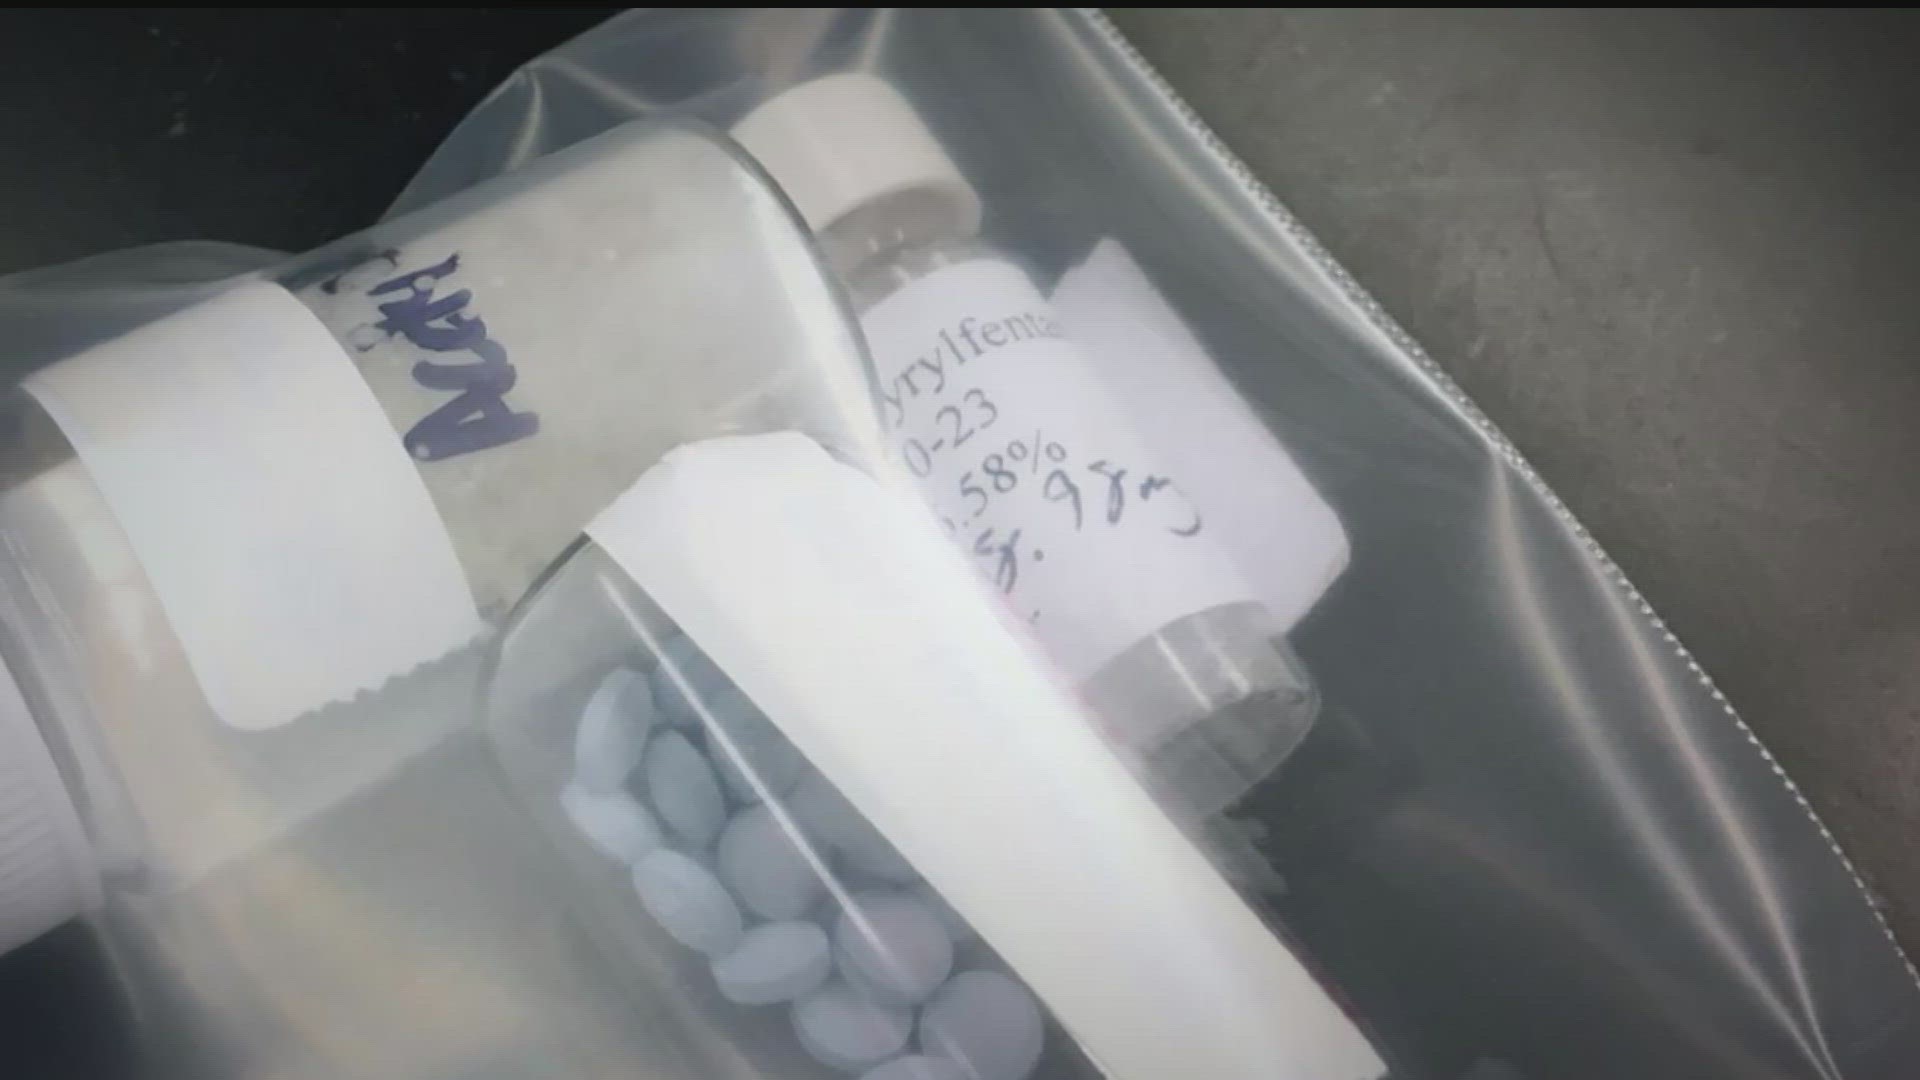 Minnesota recorded 32 Xylazine-related overdose deaths in 2022.